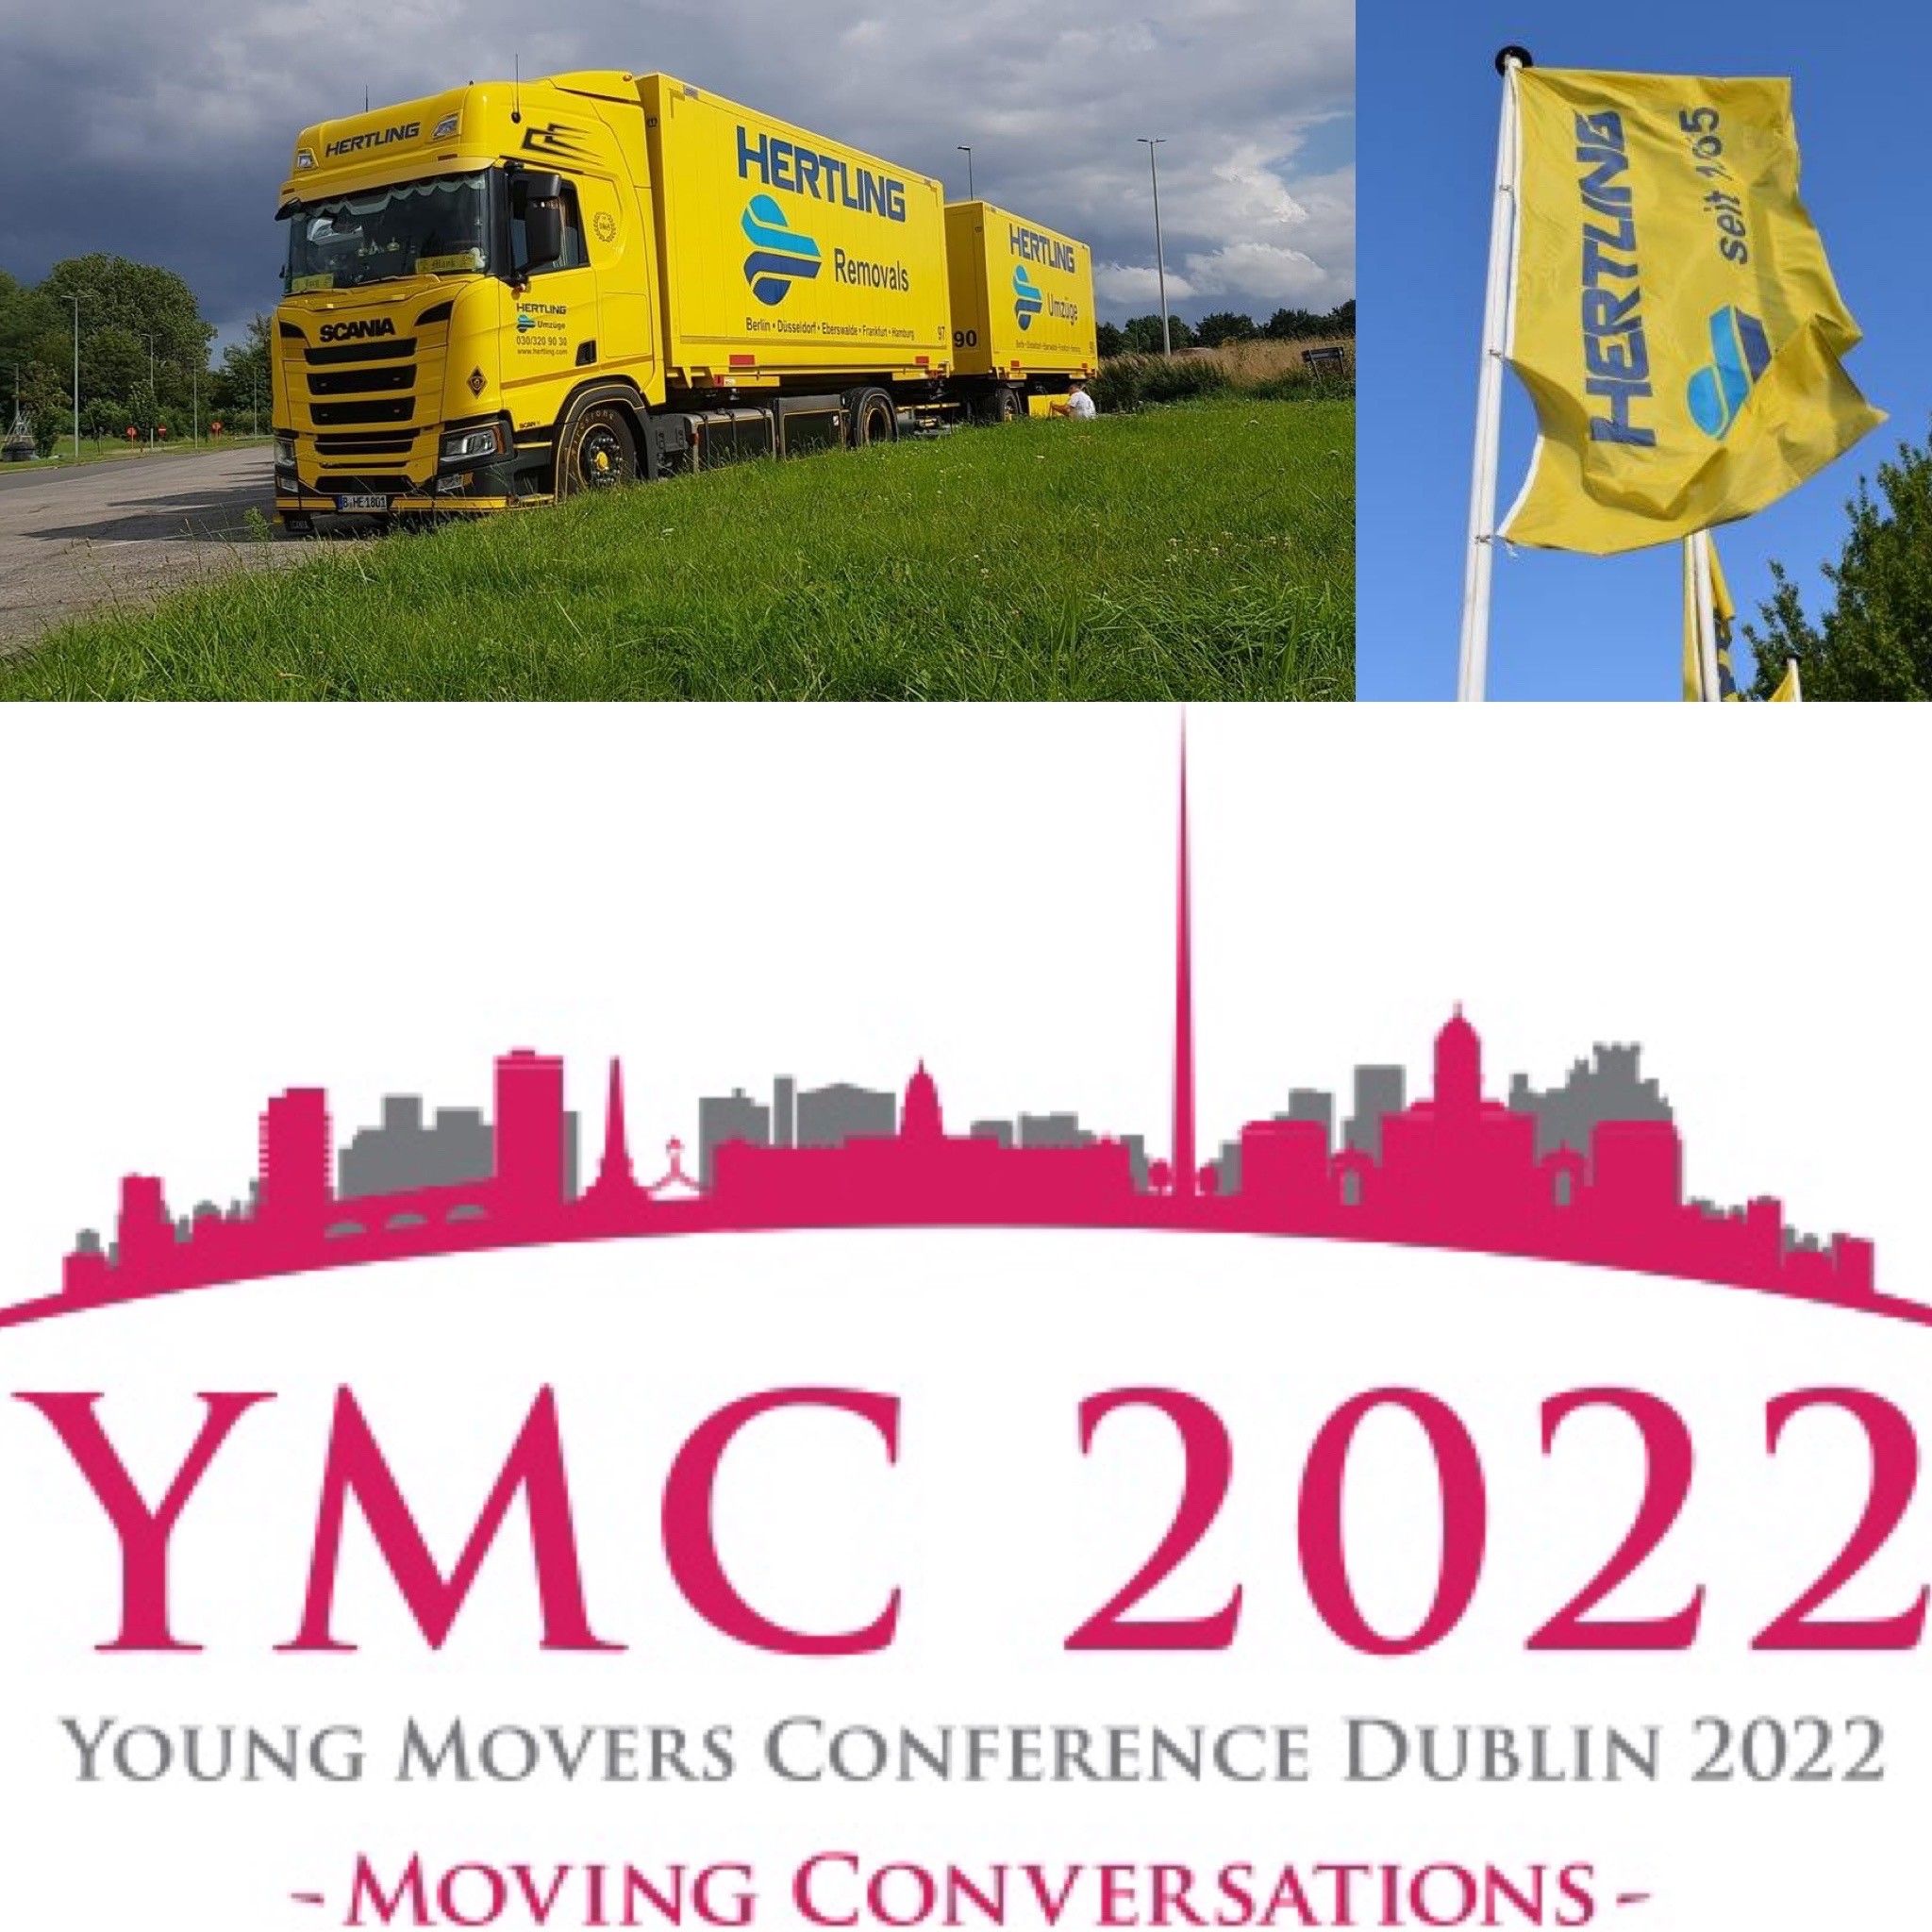 For years, the Young Movers Conference (YMC)